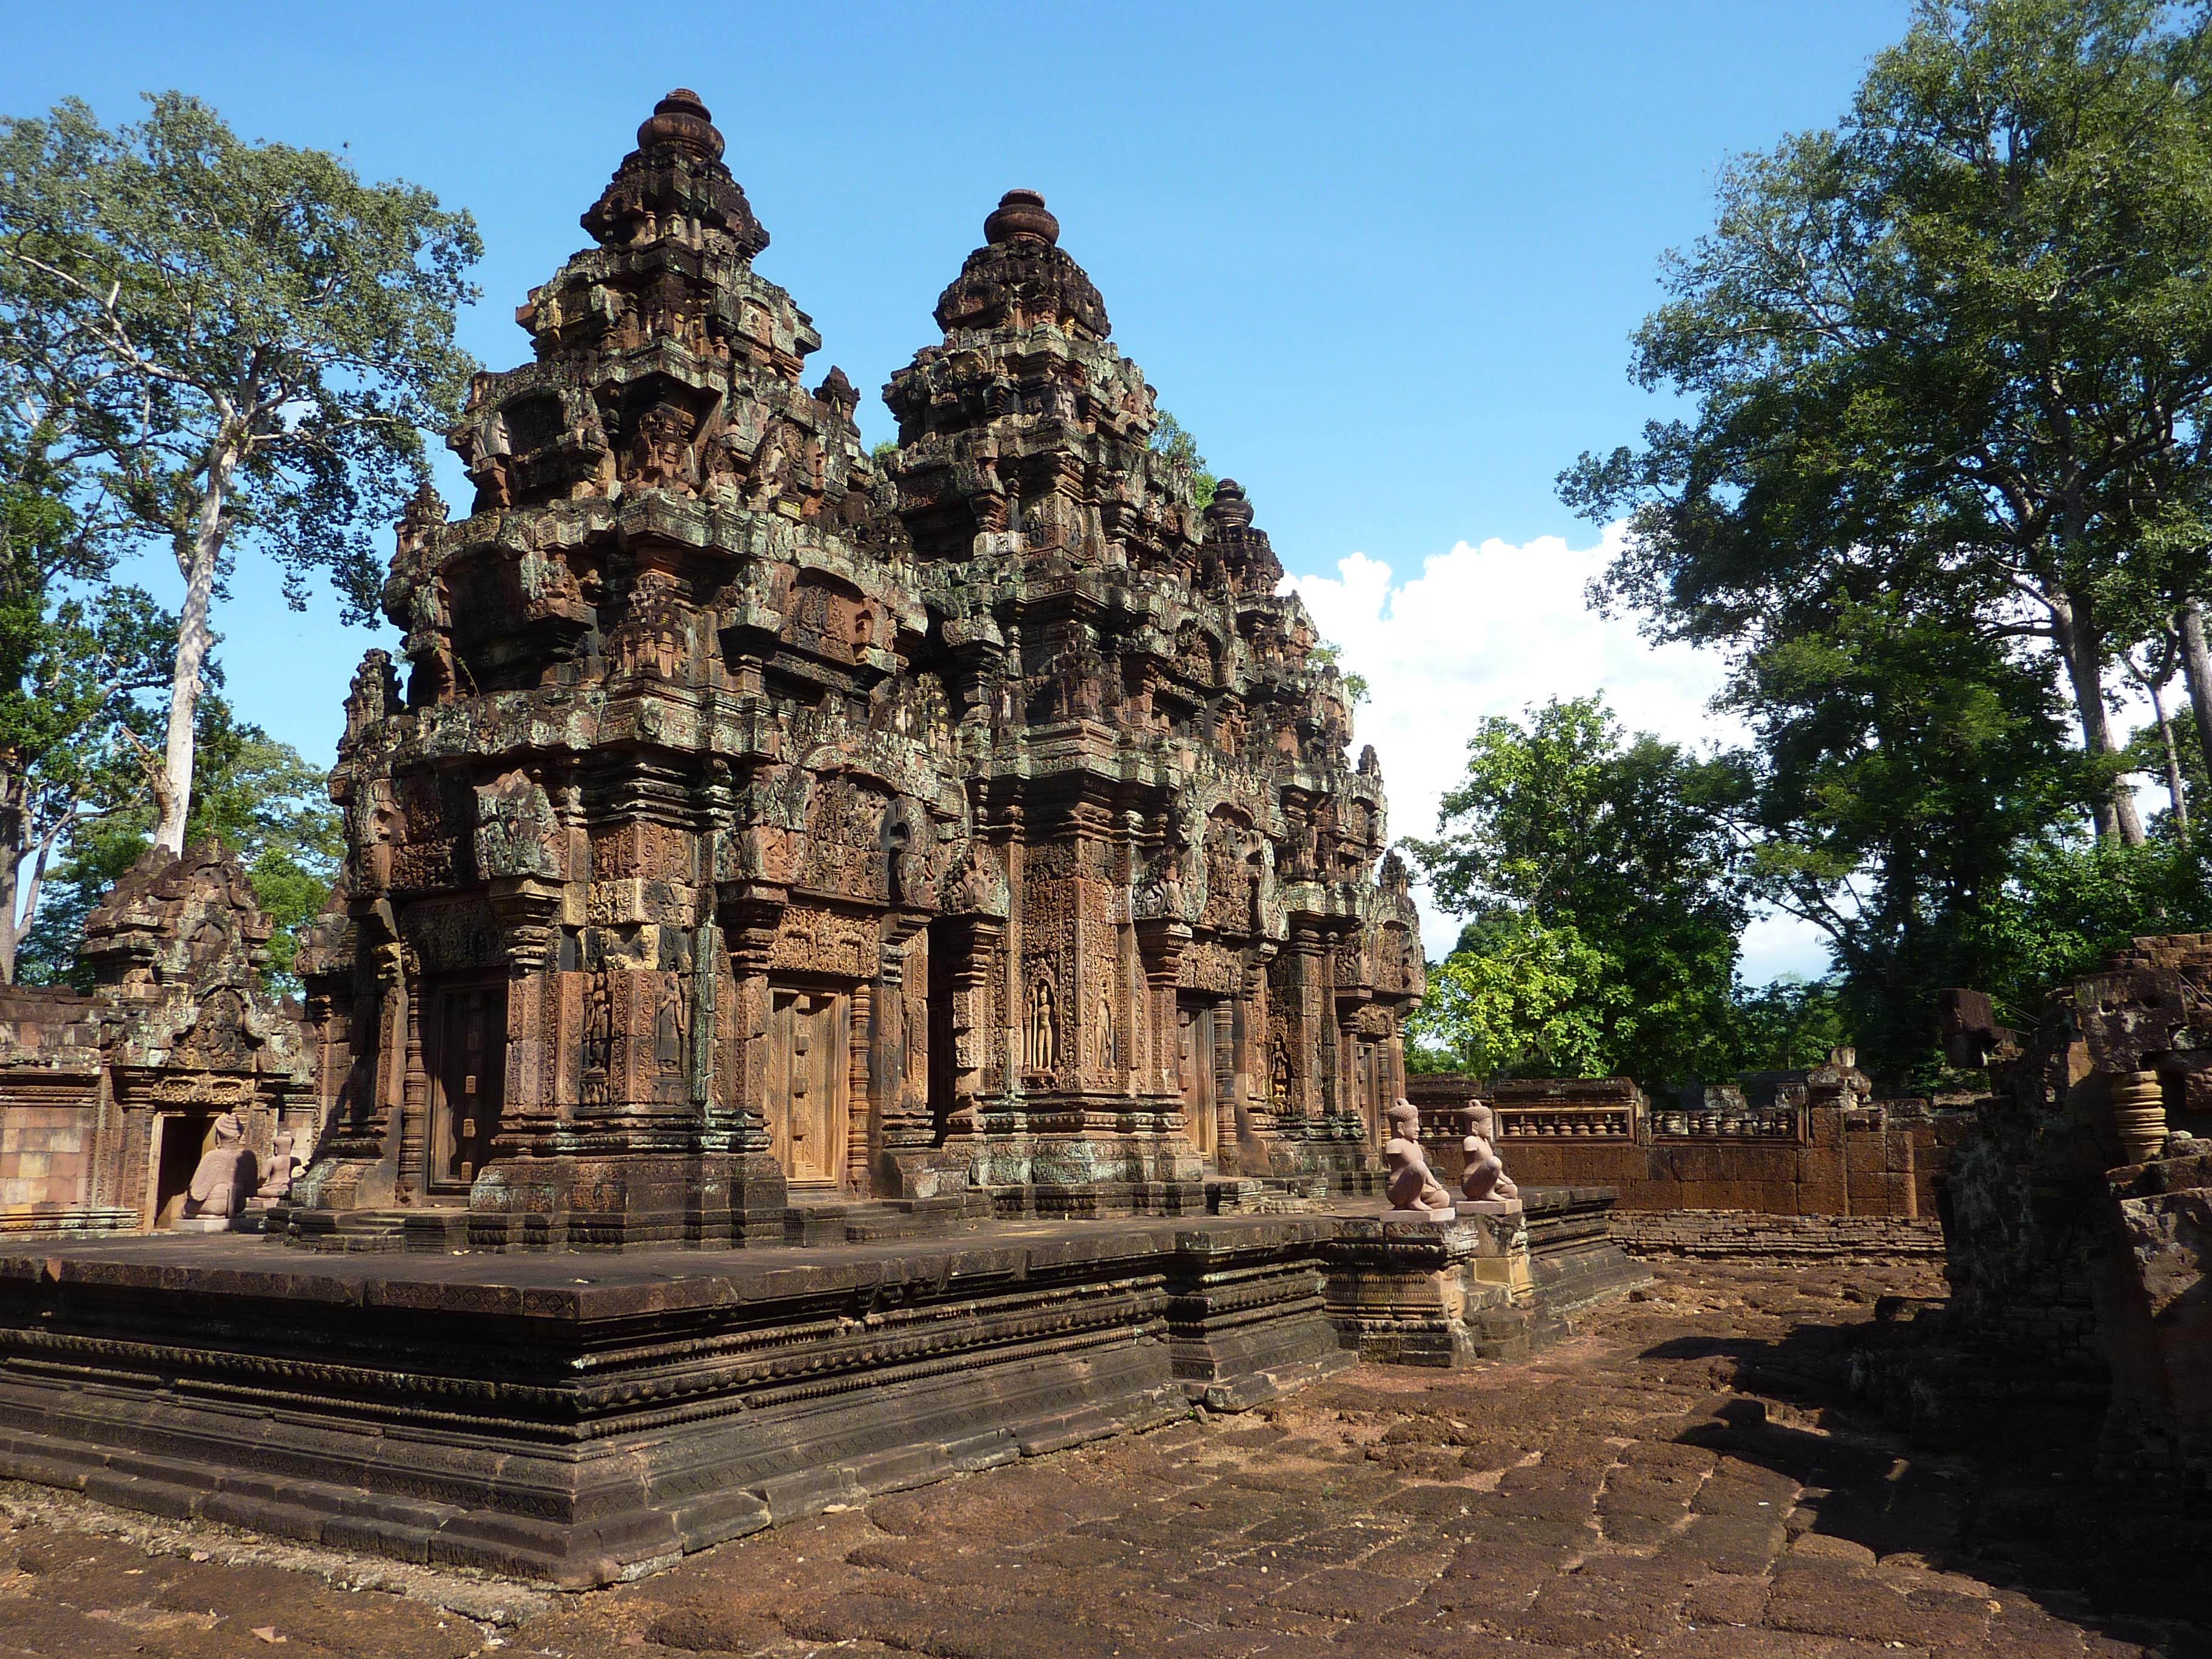 a stone building with many towers with Banteay Srei in the background